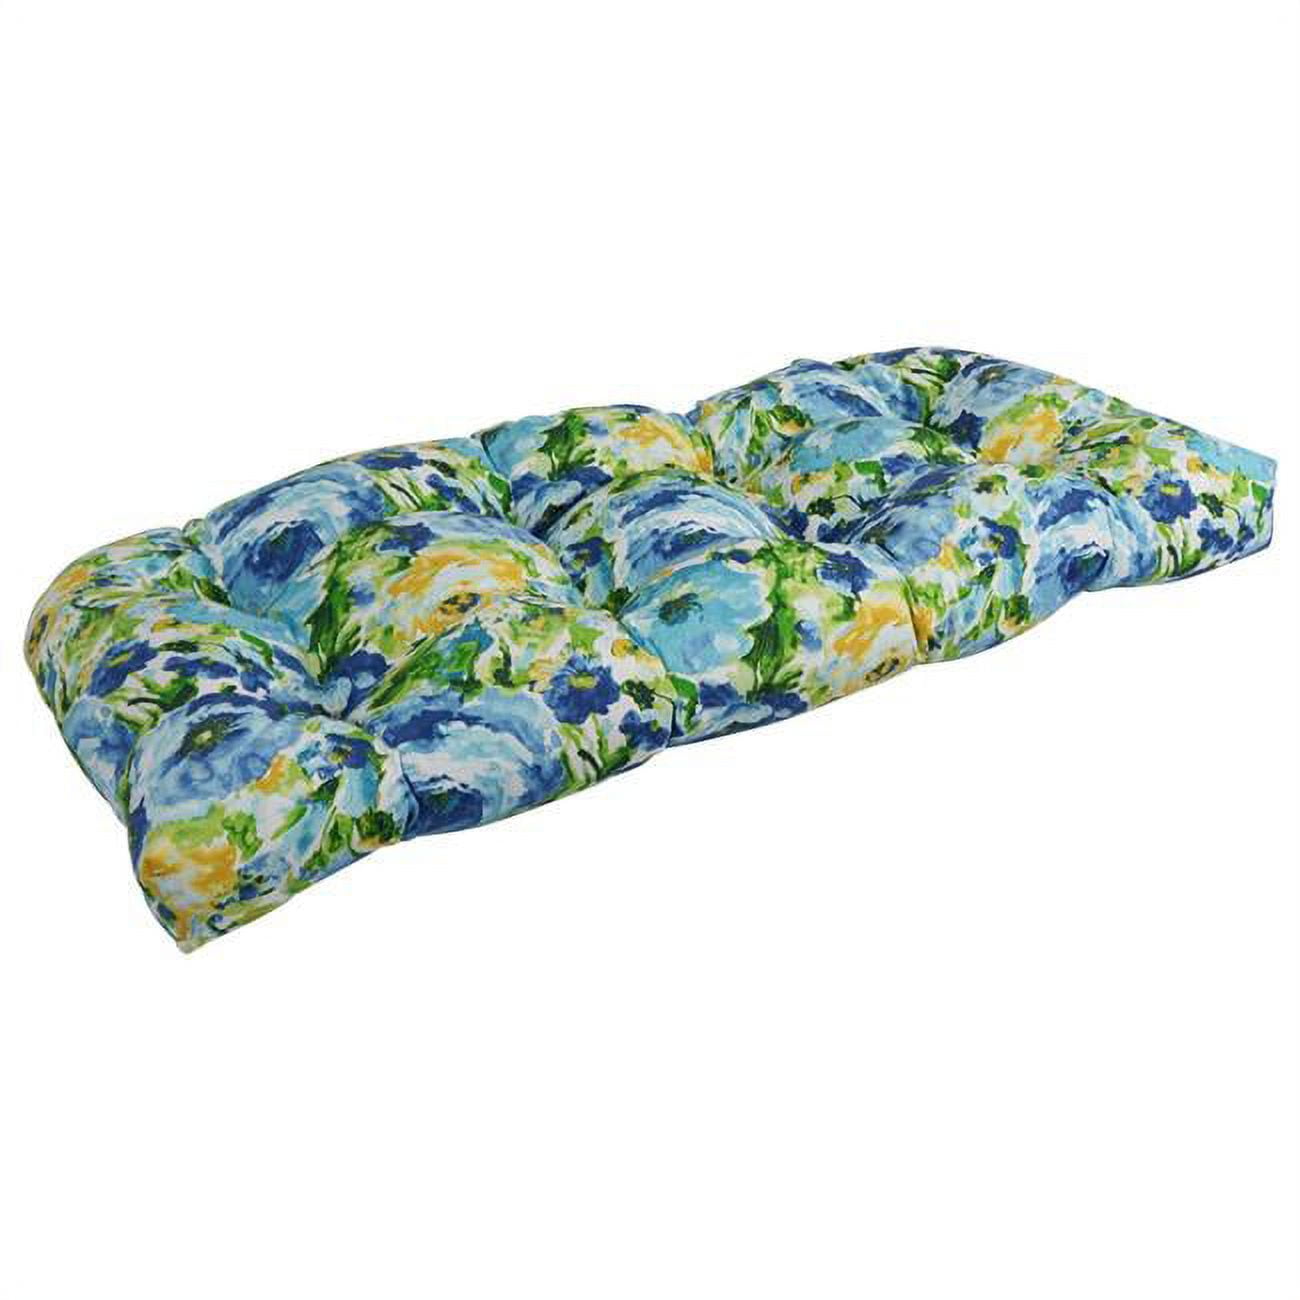 Picture of Blazing Needles 93180-LS-REO-65 42 x 19 in. U-Shaped Patterned Spun Polyester Tufted Settee & Bench Cushion&#44; Lesandra Sunblue